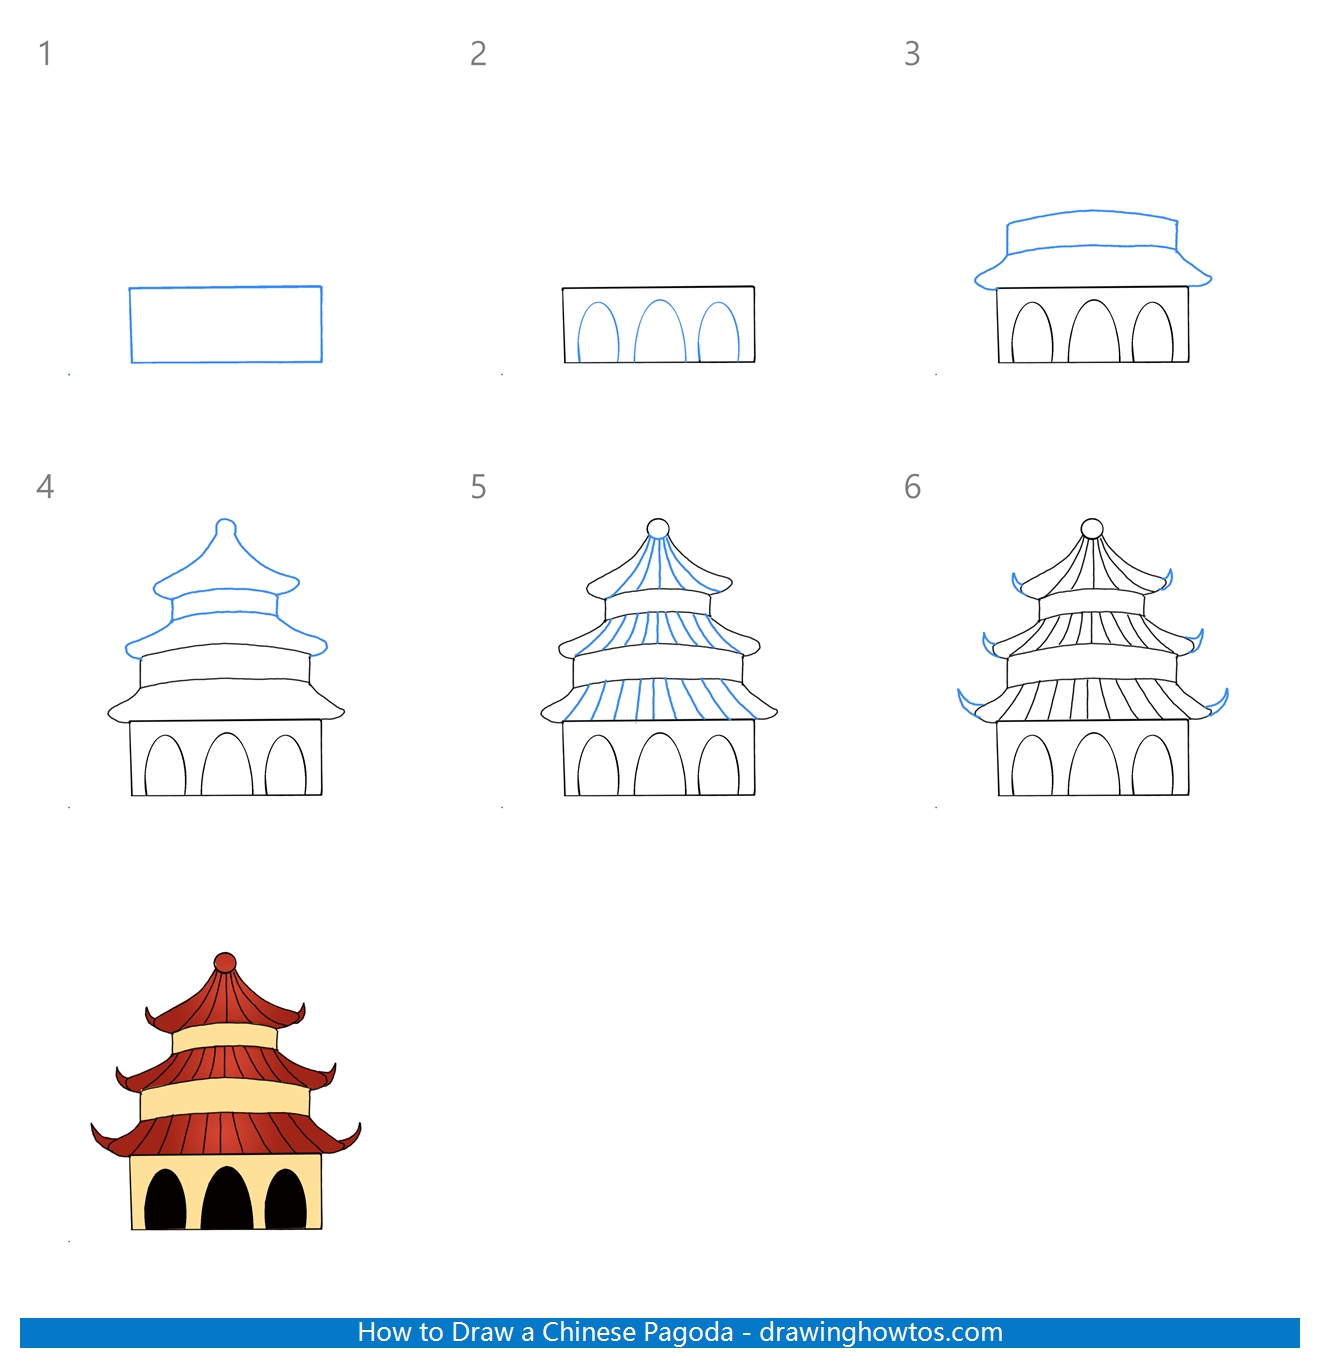 How to Draw a Chinese Pagoda Step by Step